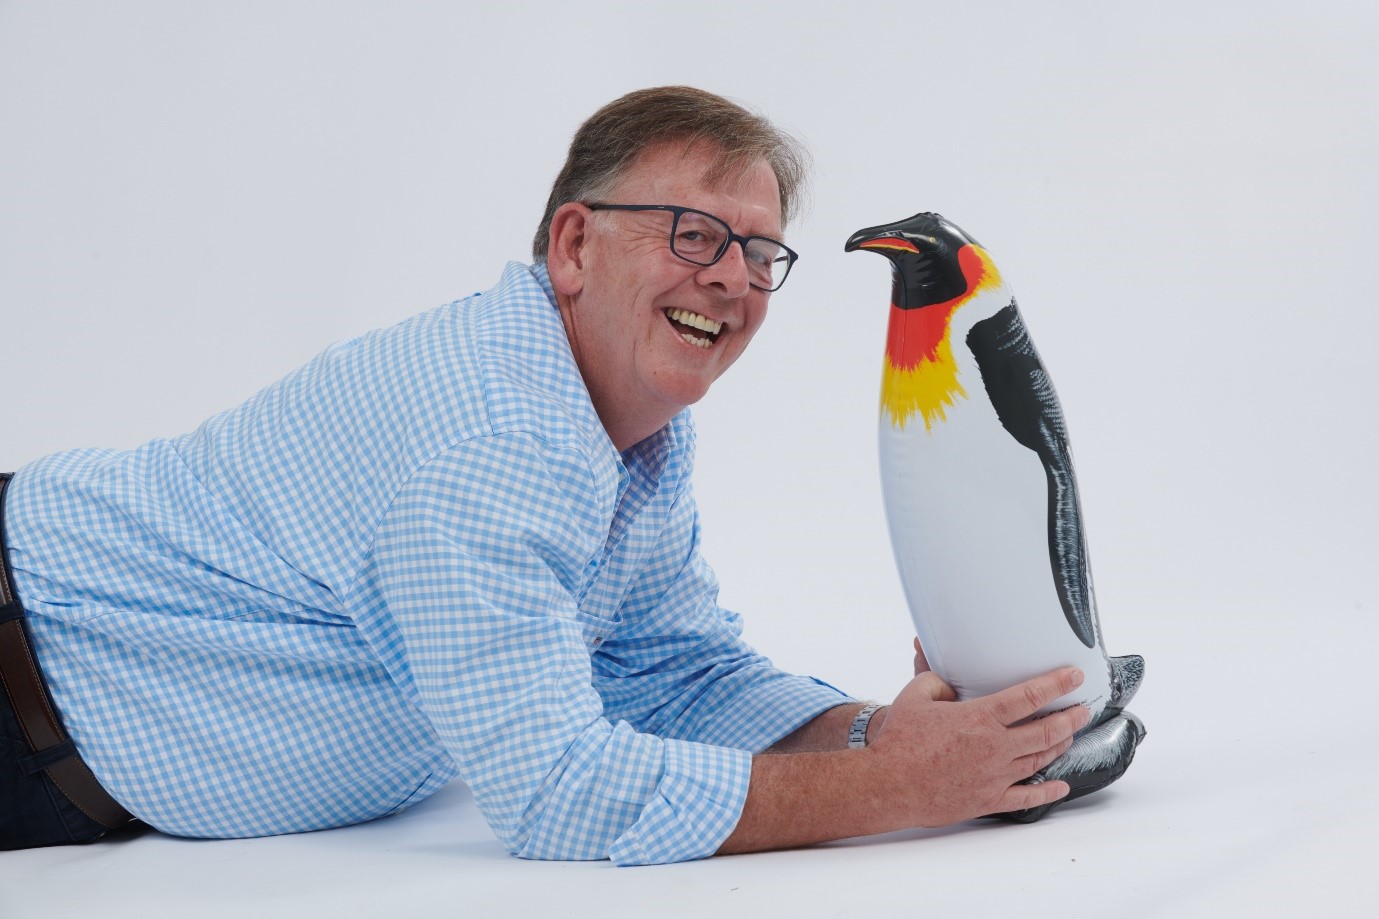 Big Yellow Penguin aims to Prompt Discussion within Conveyancing Sector